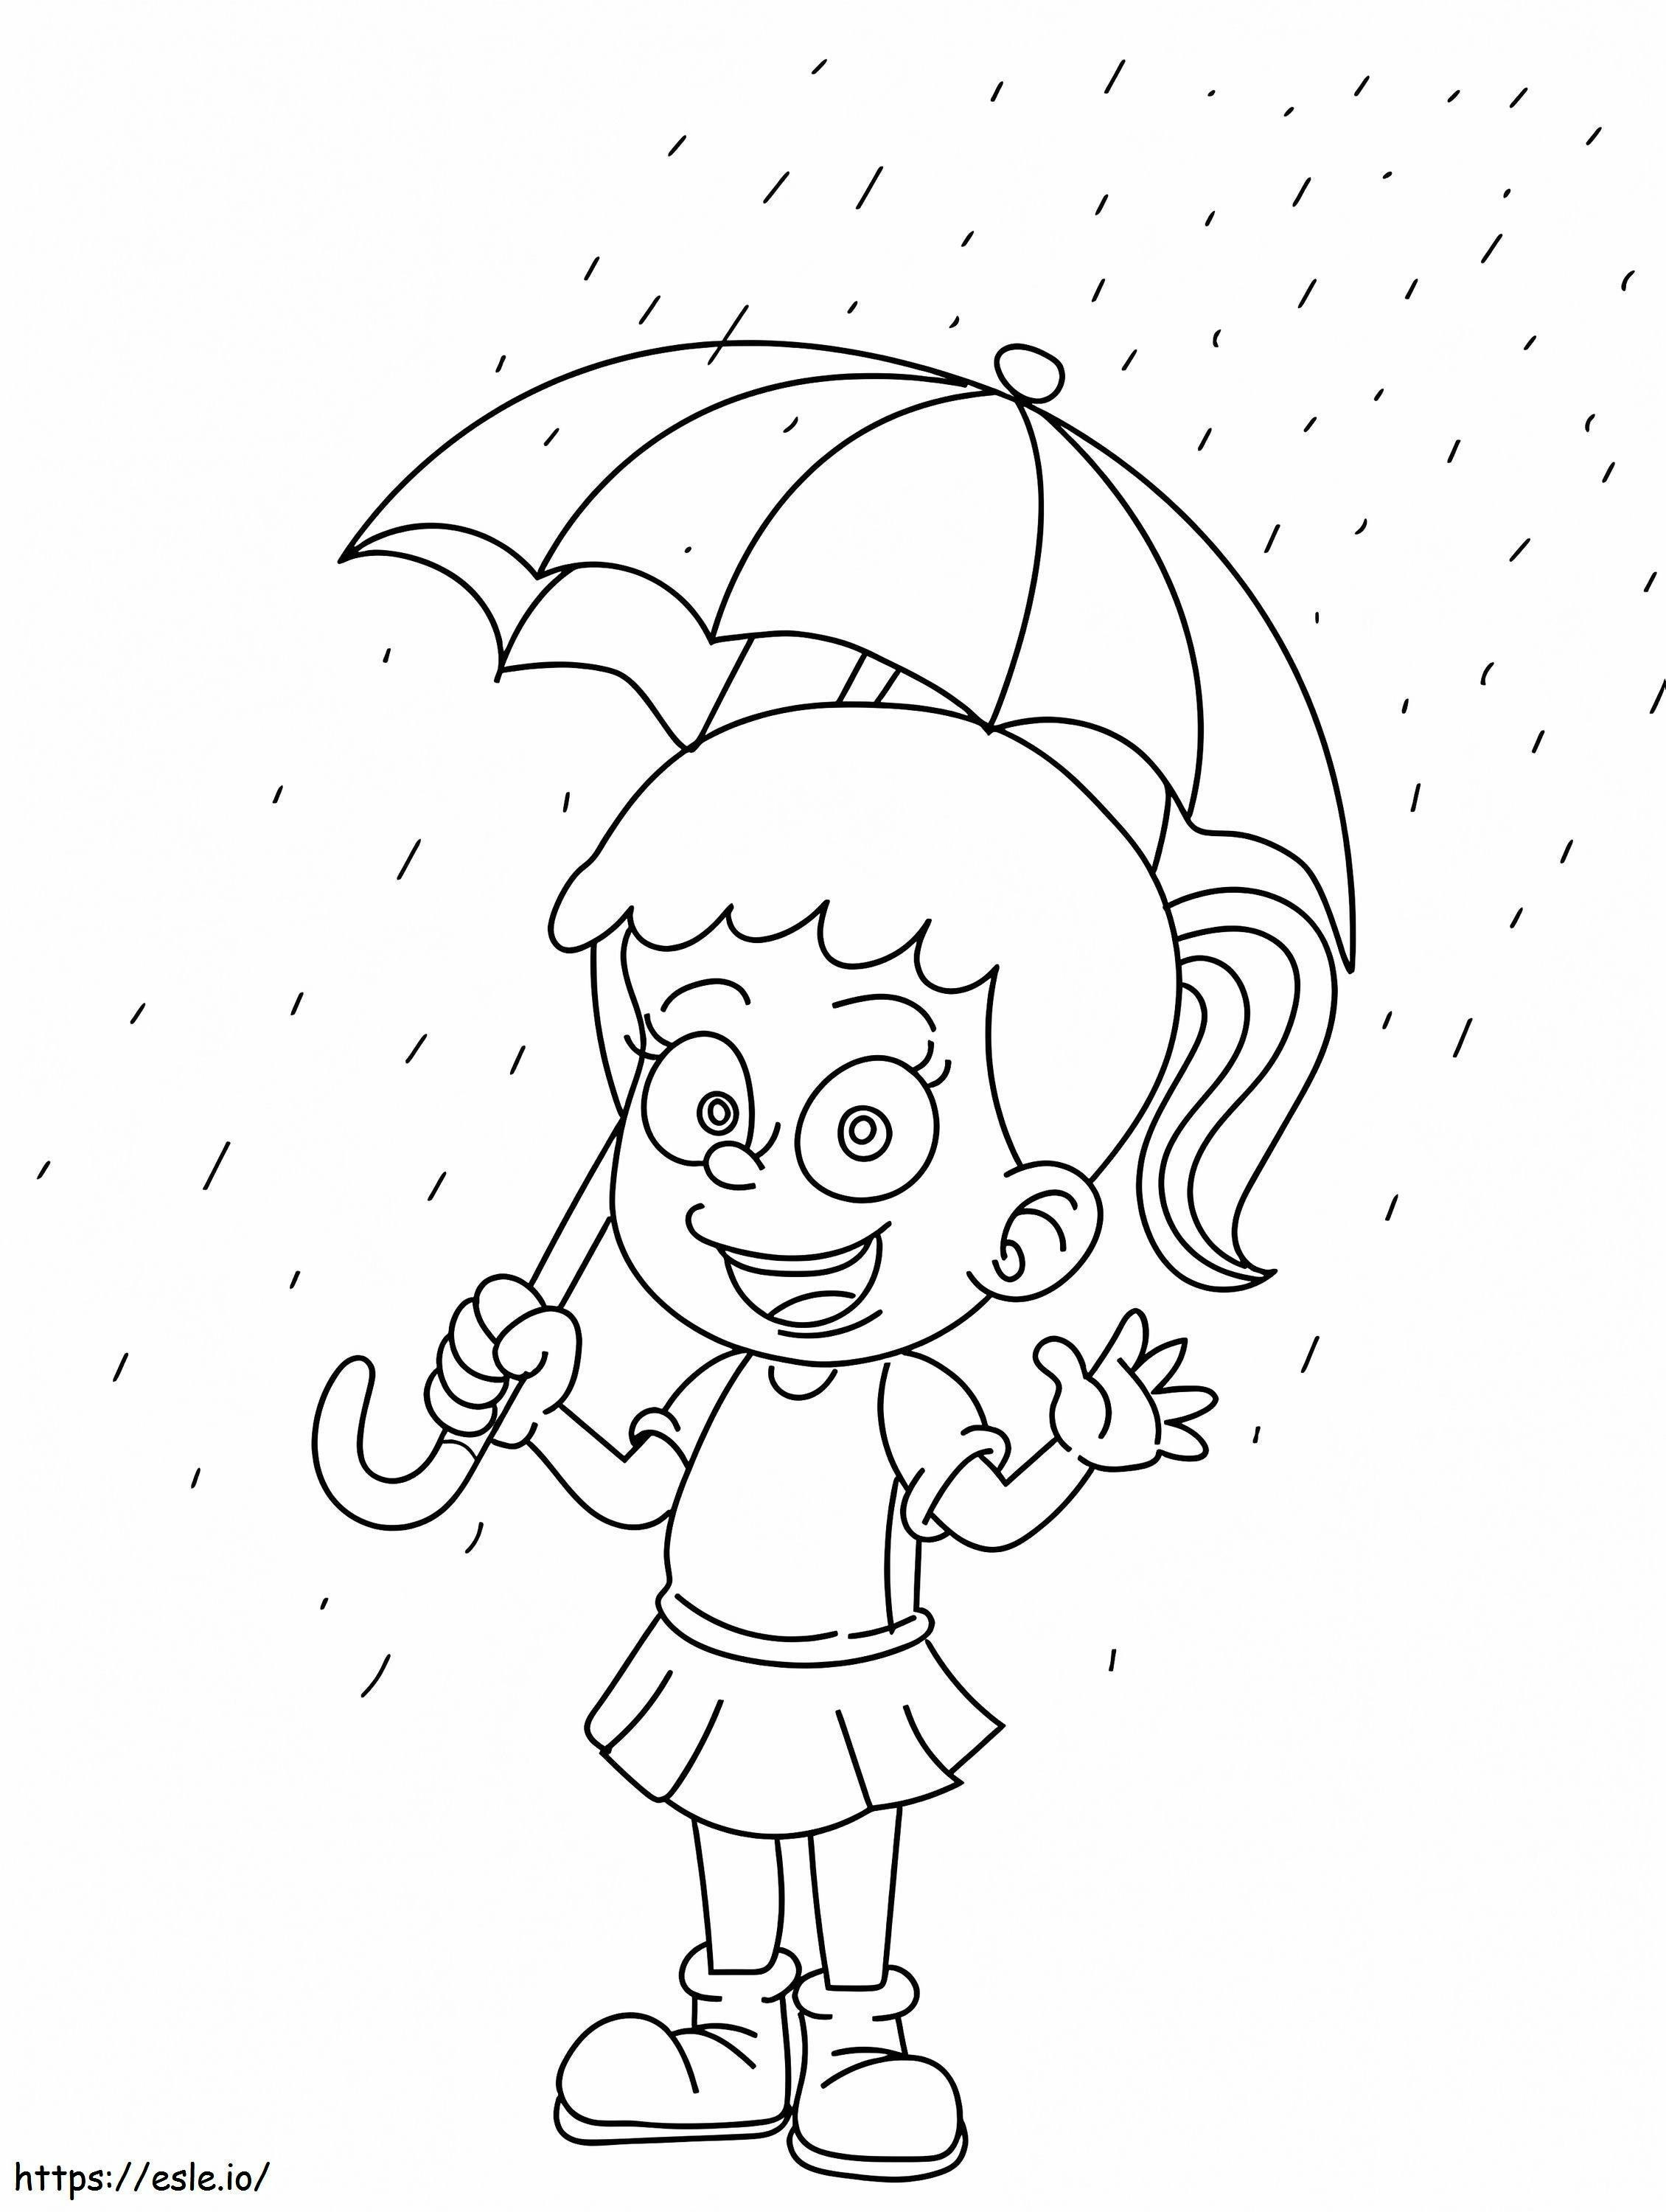 Little Girl Under The Rain coloring page